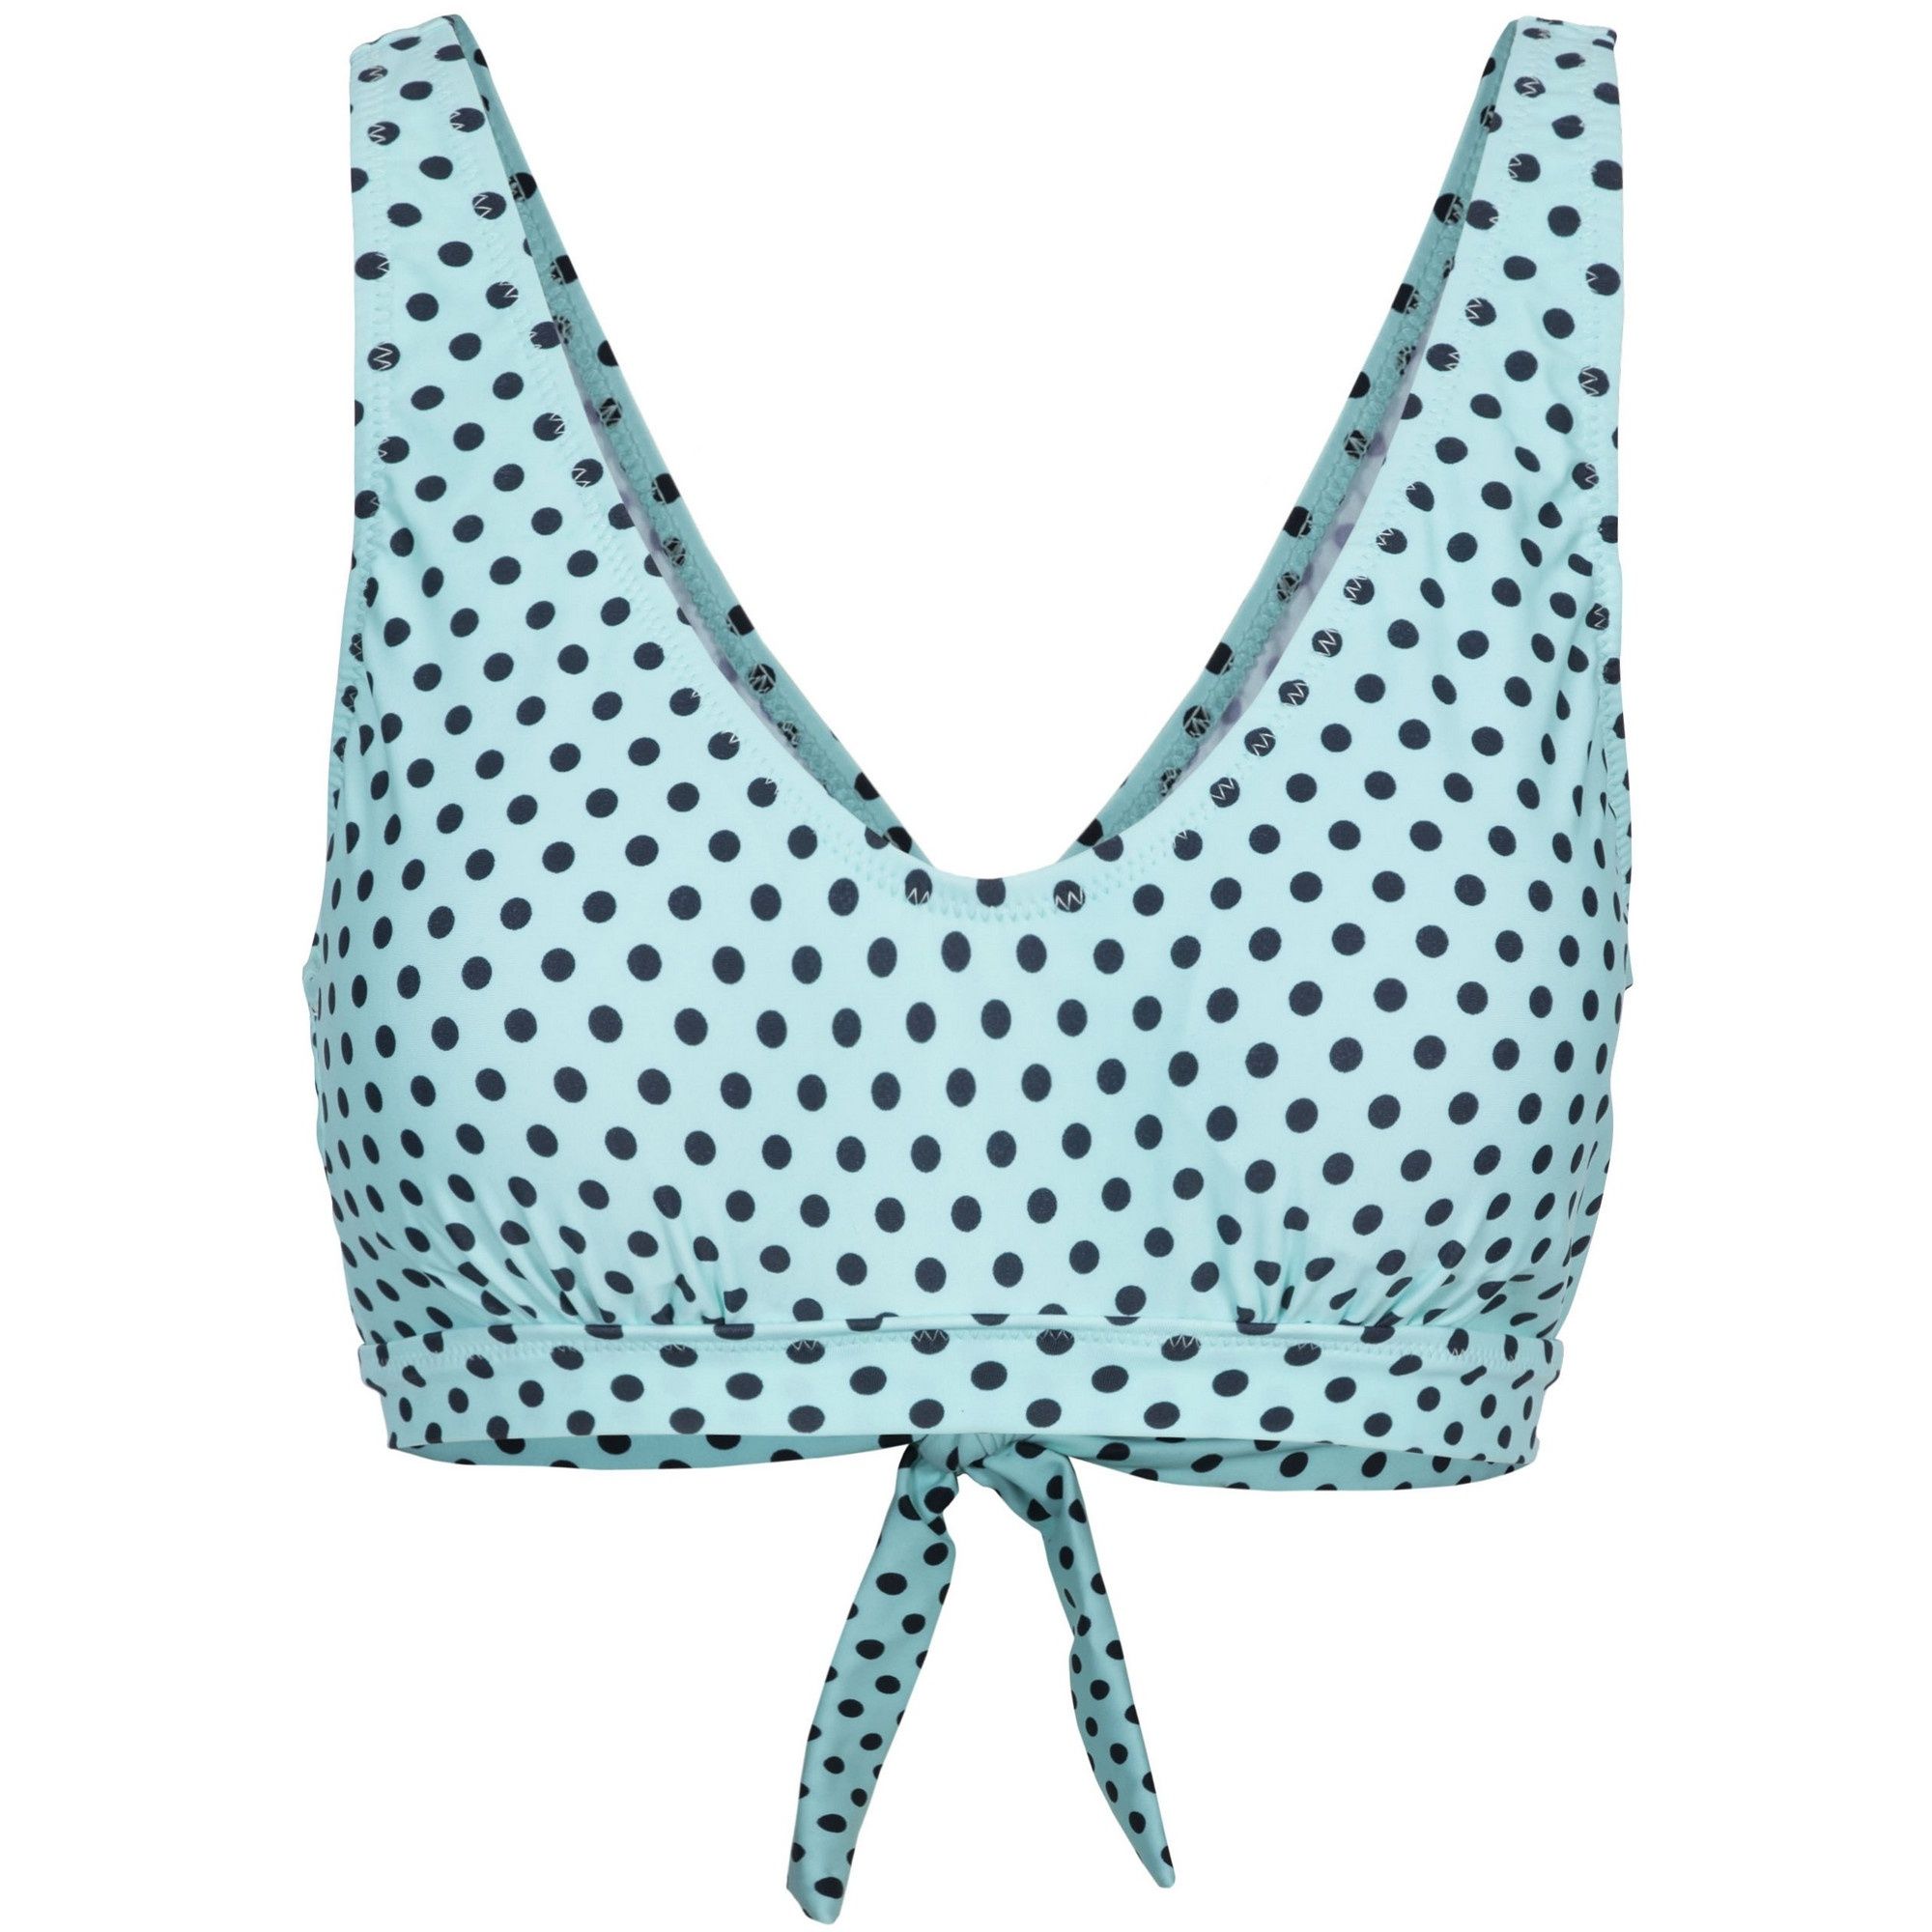 Bikini top. Tie back. All over print. Removable bust pads. 80% Polyamide, 20% Elastane. Trespass Womens Chest Sizing (approx): XS/8 - 32in/81cm, S/10 - 34in/86cm, M/12 - 36in/91.4cm, L/14 - 38in/96.5cm, XL/16 - 40in/101.5cm, XXL/18 - 42in/106.5cm.